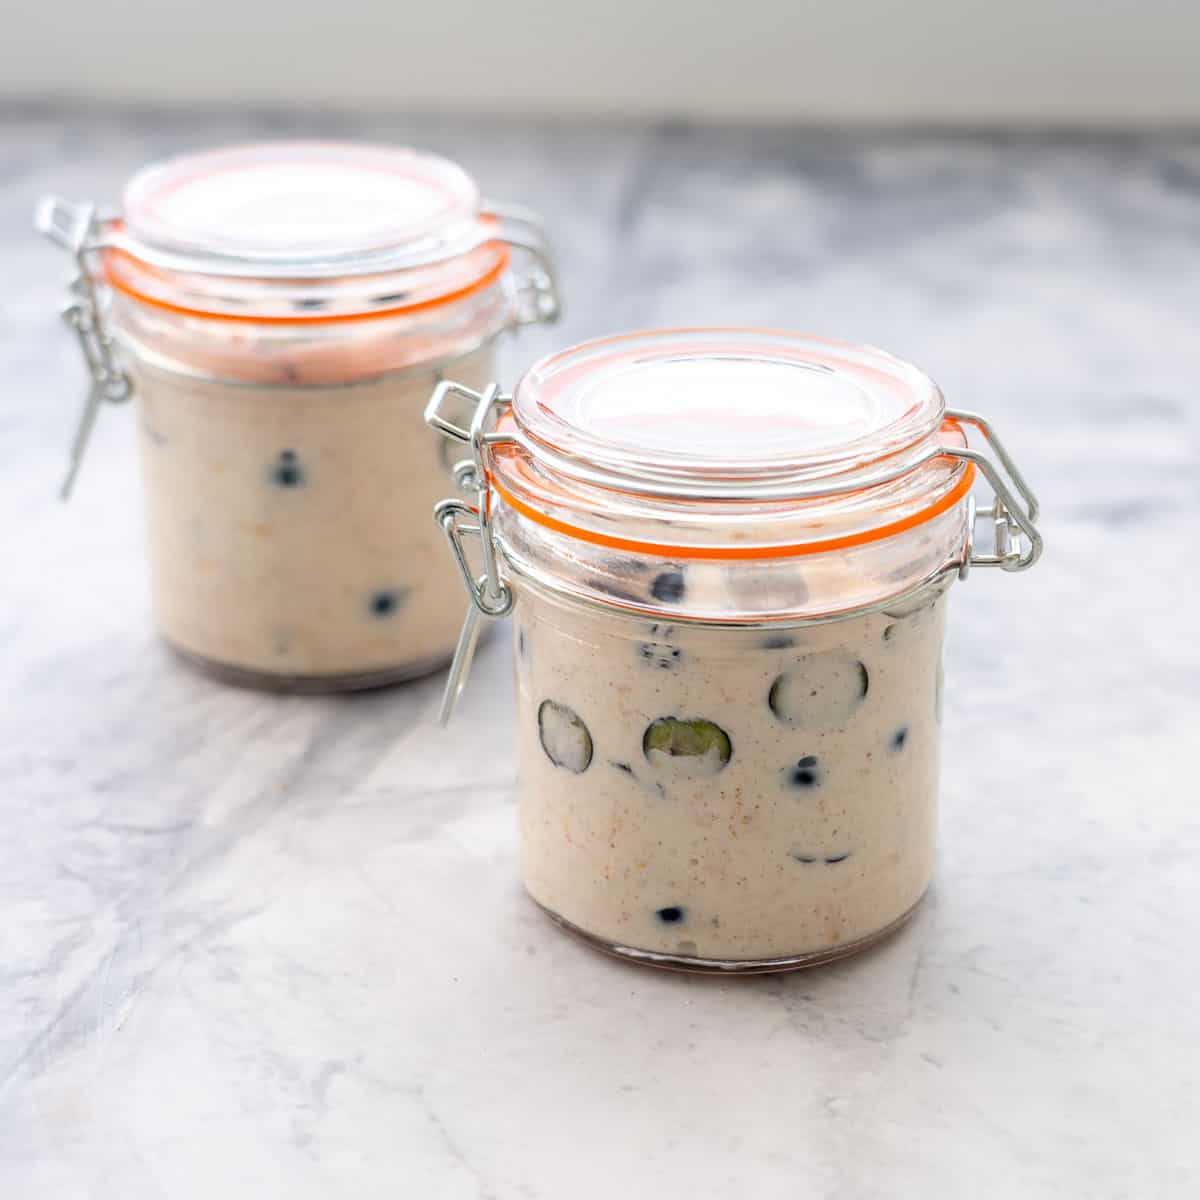 Two portioned jars filled with the Blueberry overnight oats sitting on the bench